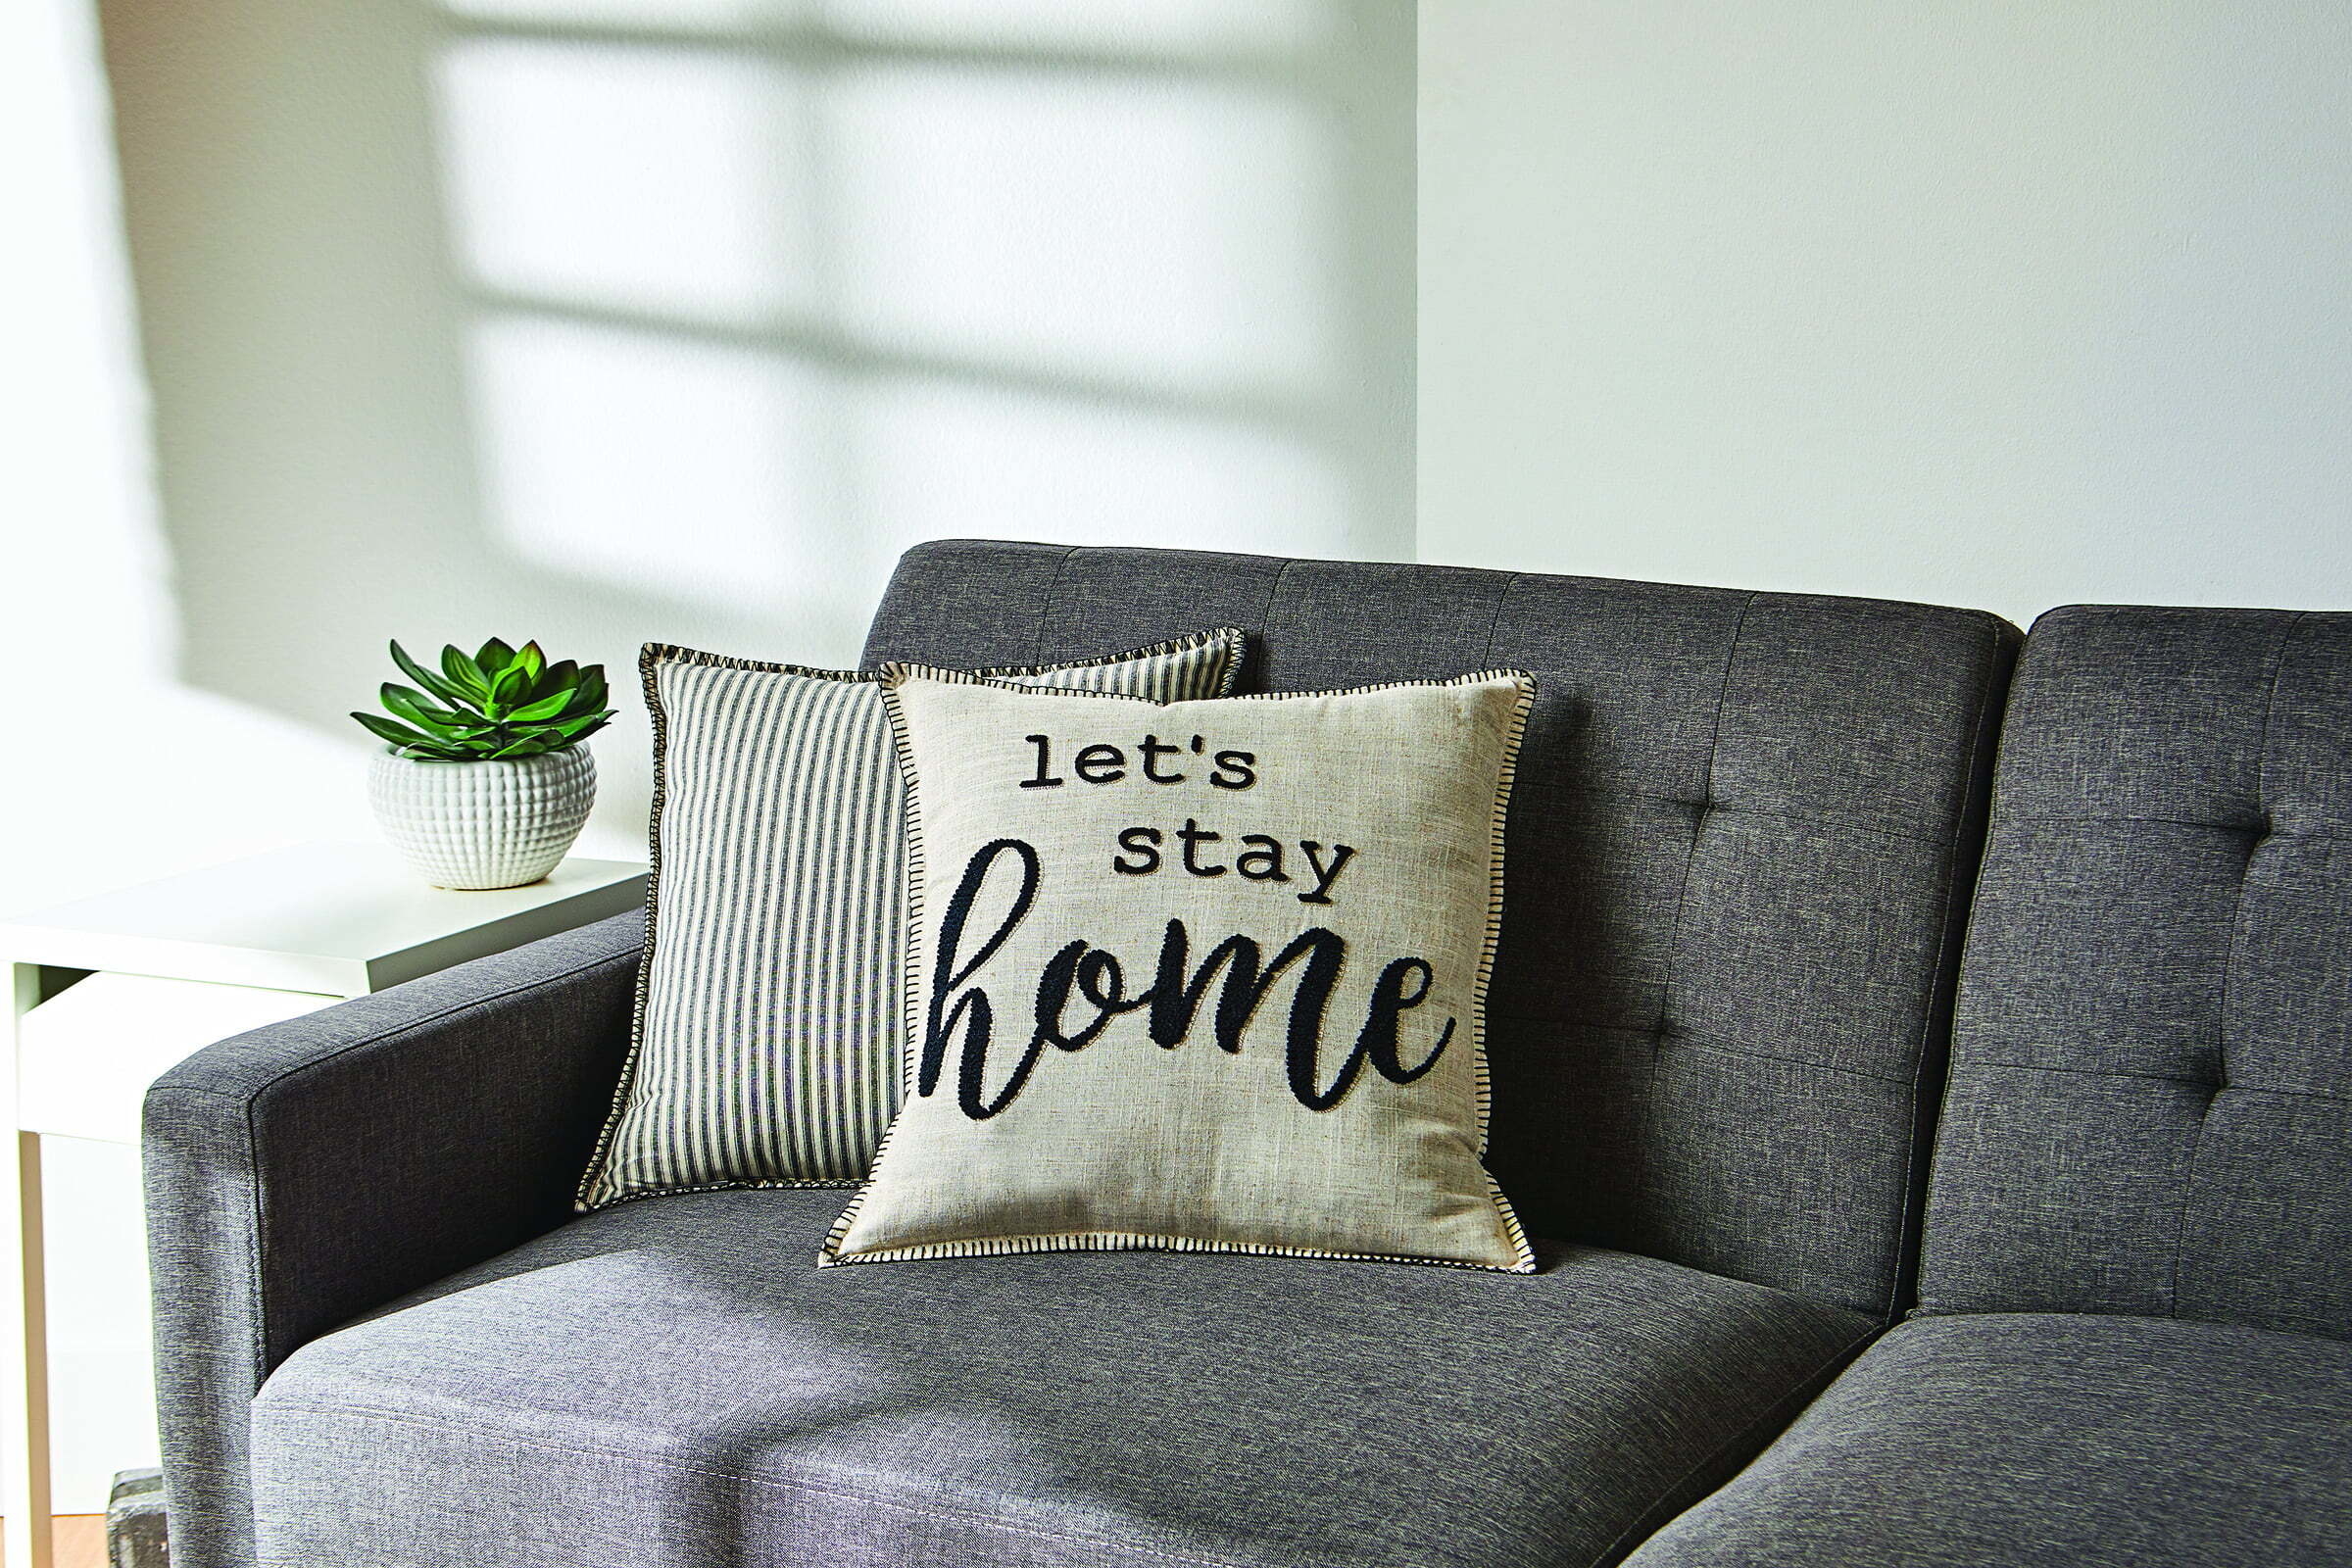 The pillow, which reads &quot;let&#x27;s stay home&quot;